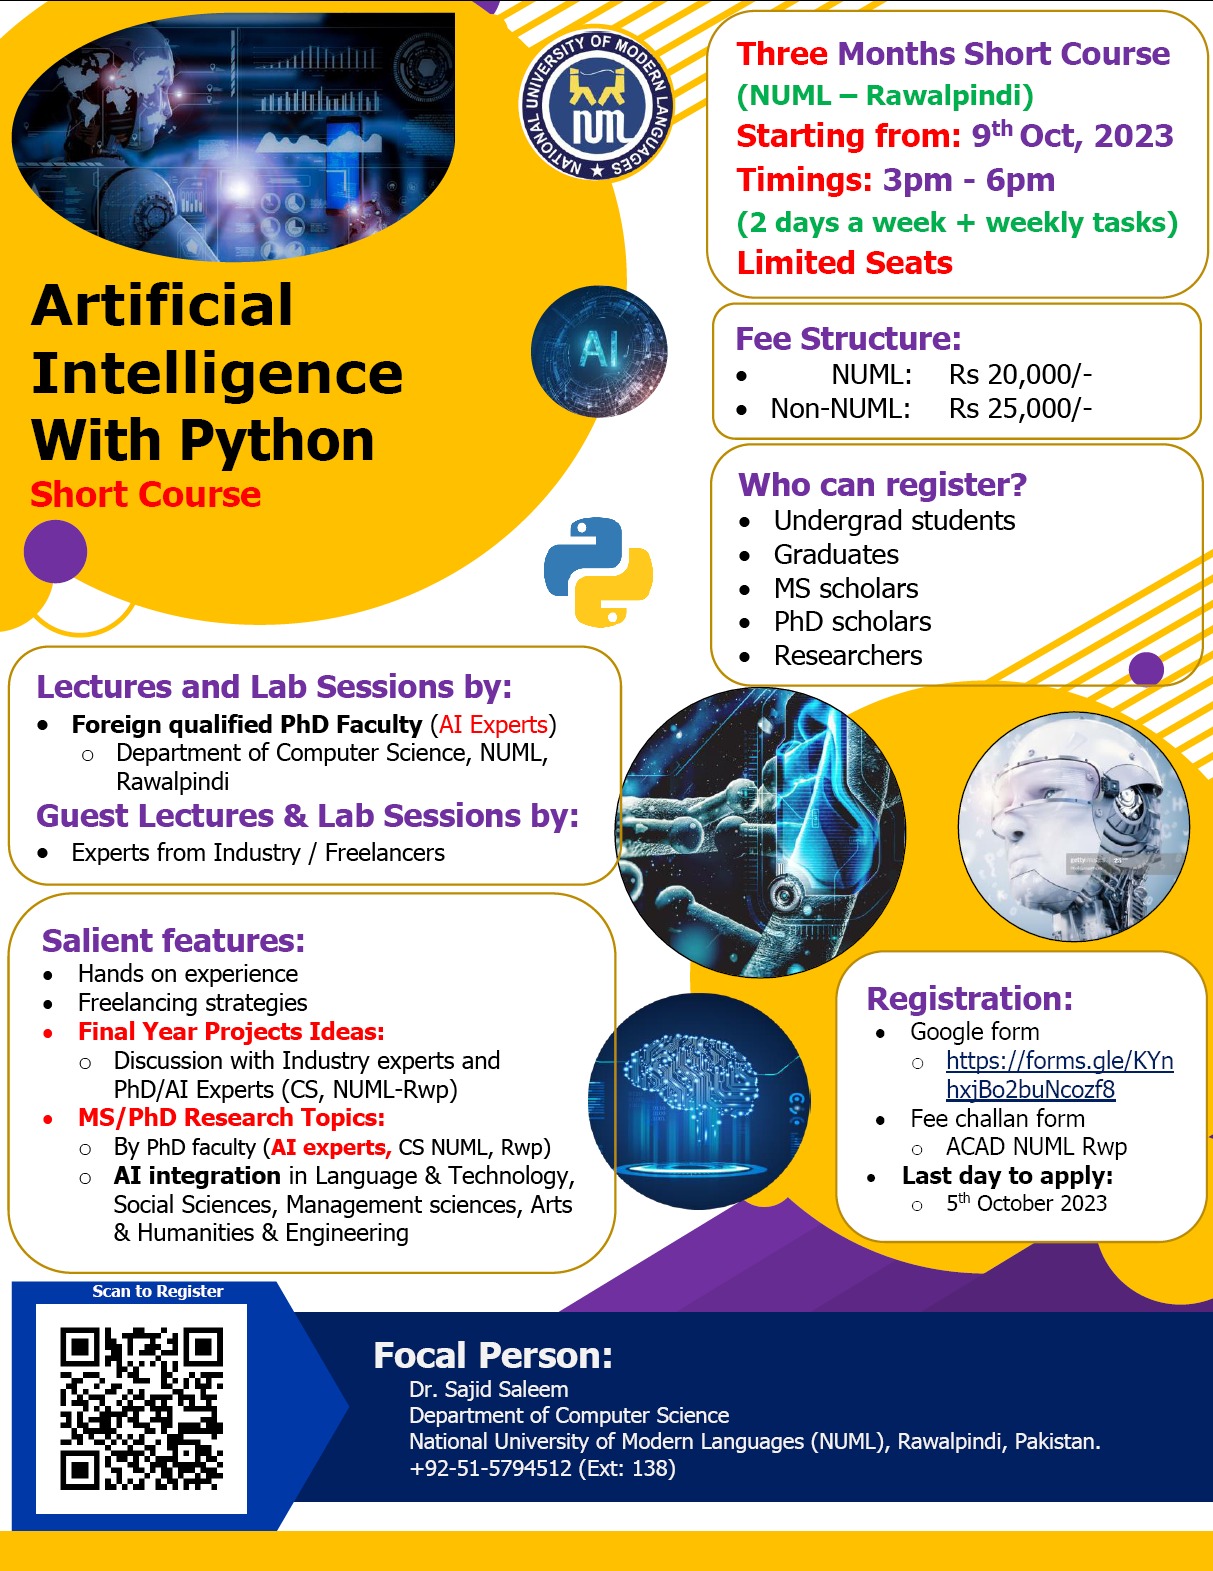 Artificial Intelligence with Python - Short Course